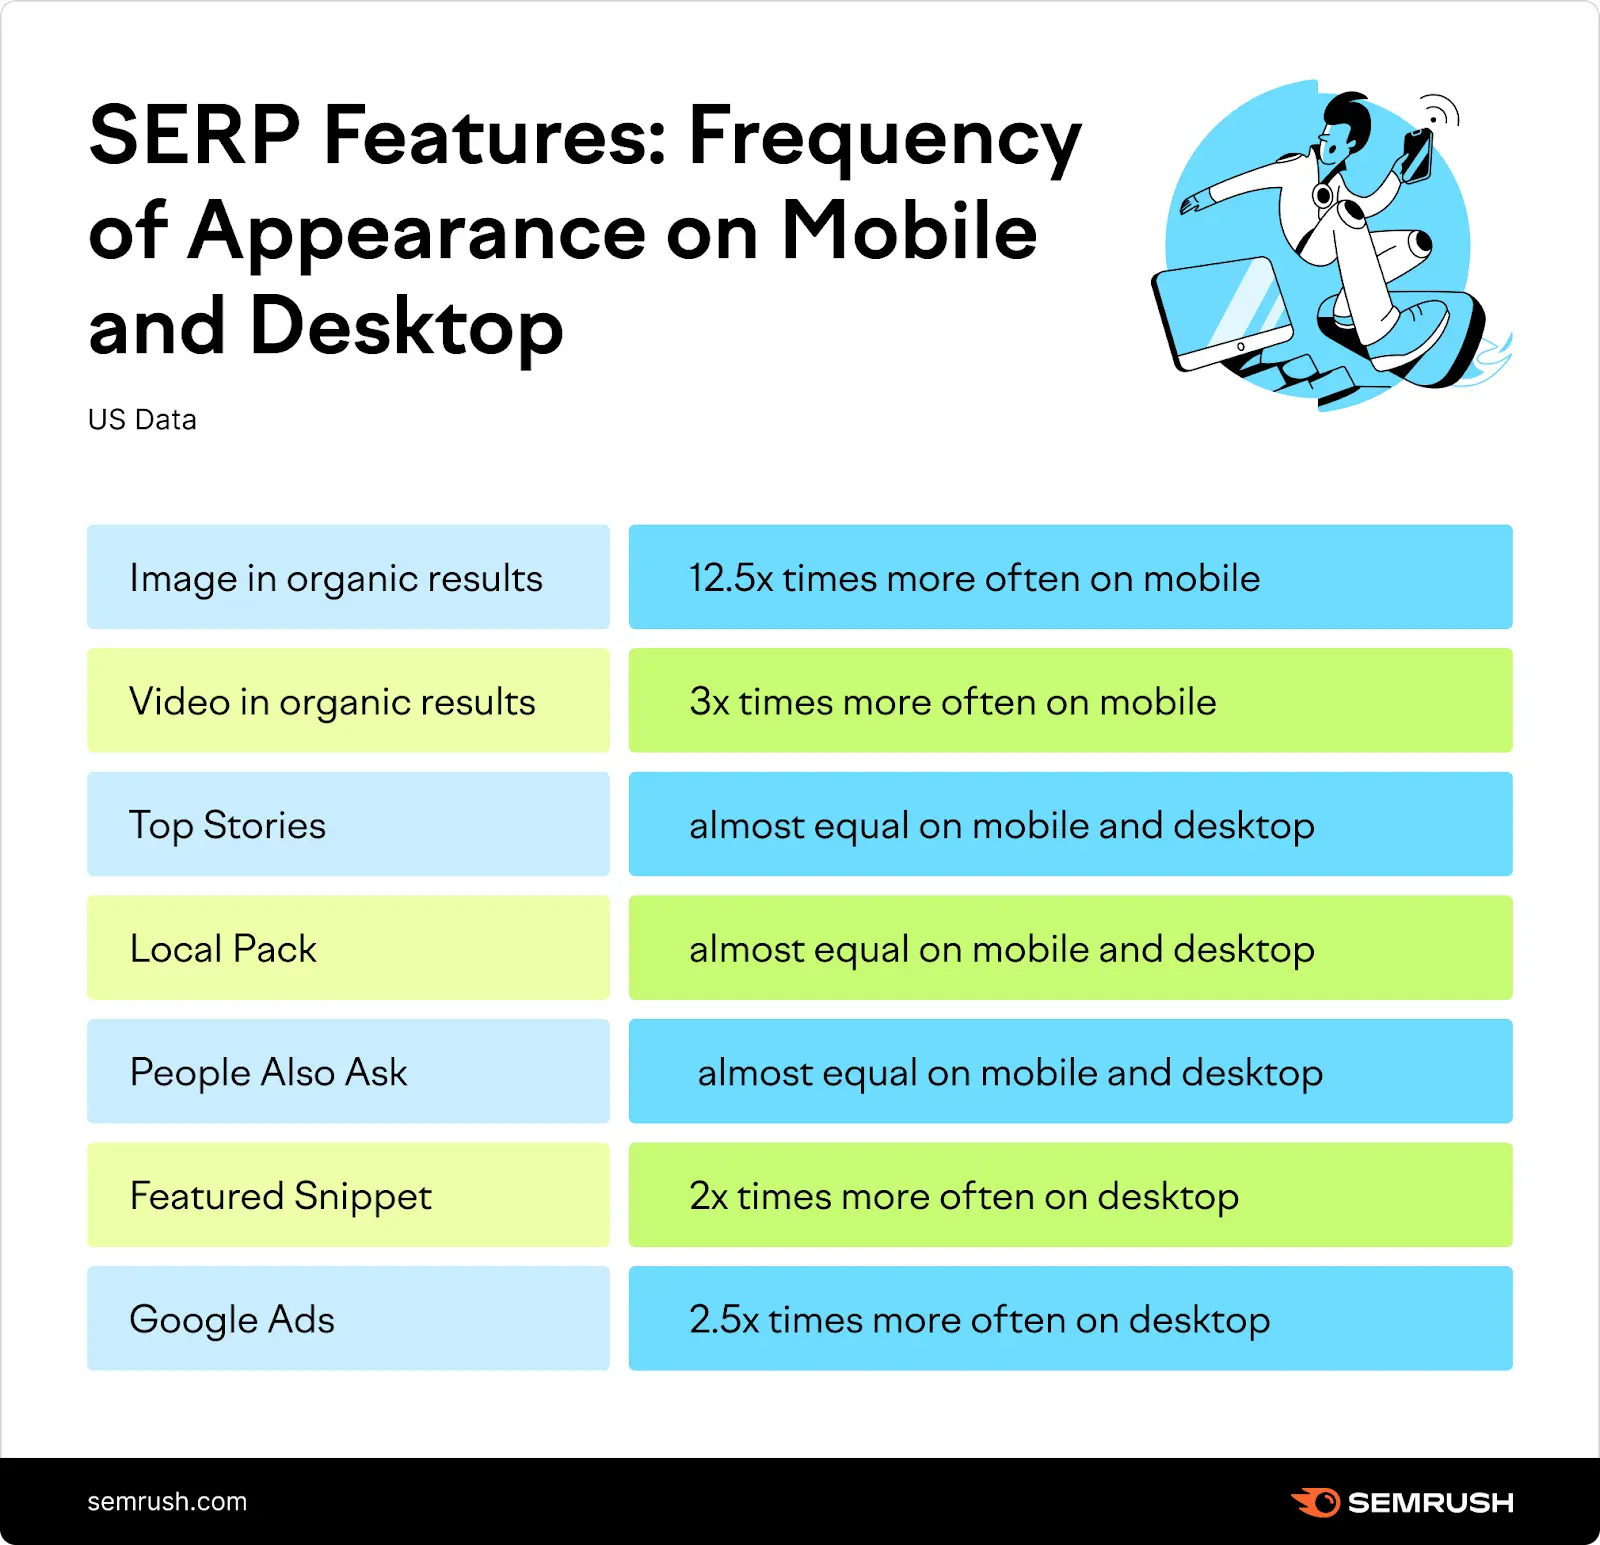 SERP Features: Frequency of Appearance on Mobile and Desktop